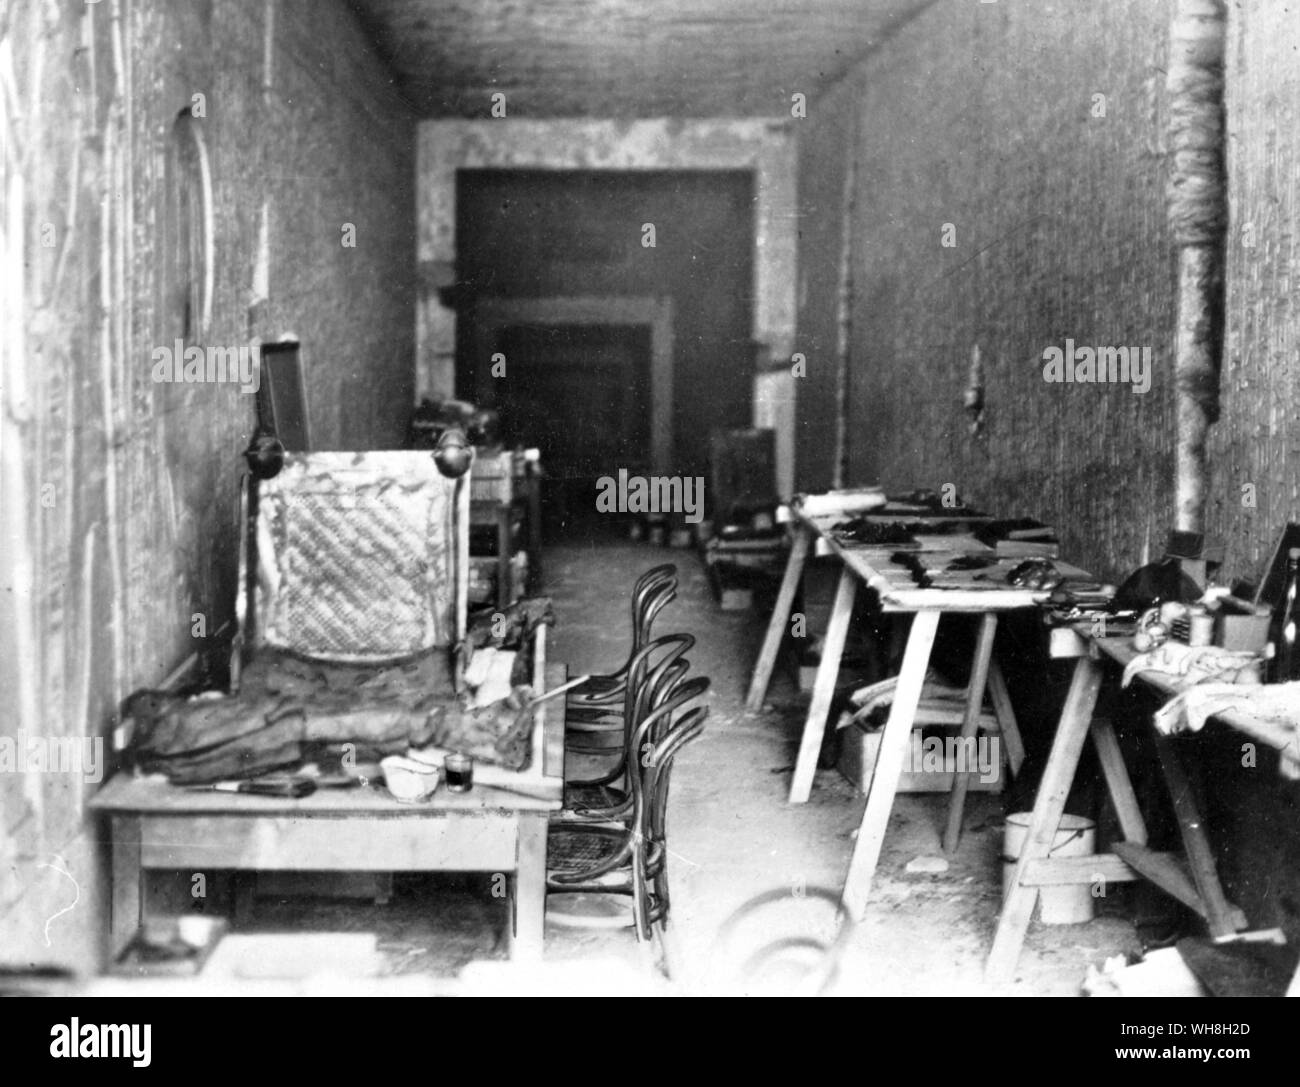 Field laboratory in the tomb of Sethos II, (reigned from 1200-1194BC). The Treasures of Tutankhamen, The Exhibition Catalogue by I E S Edwards, page 39. Stock Photo